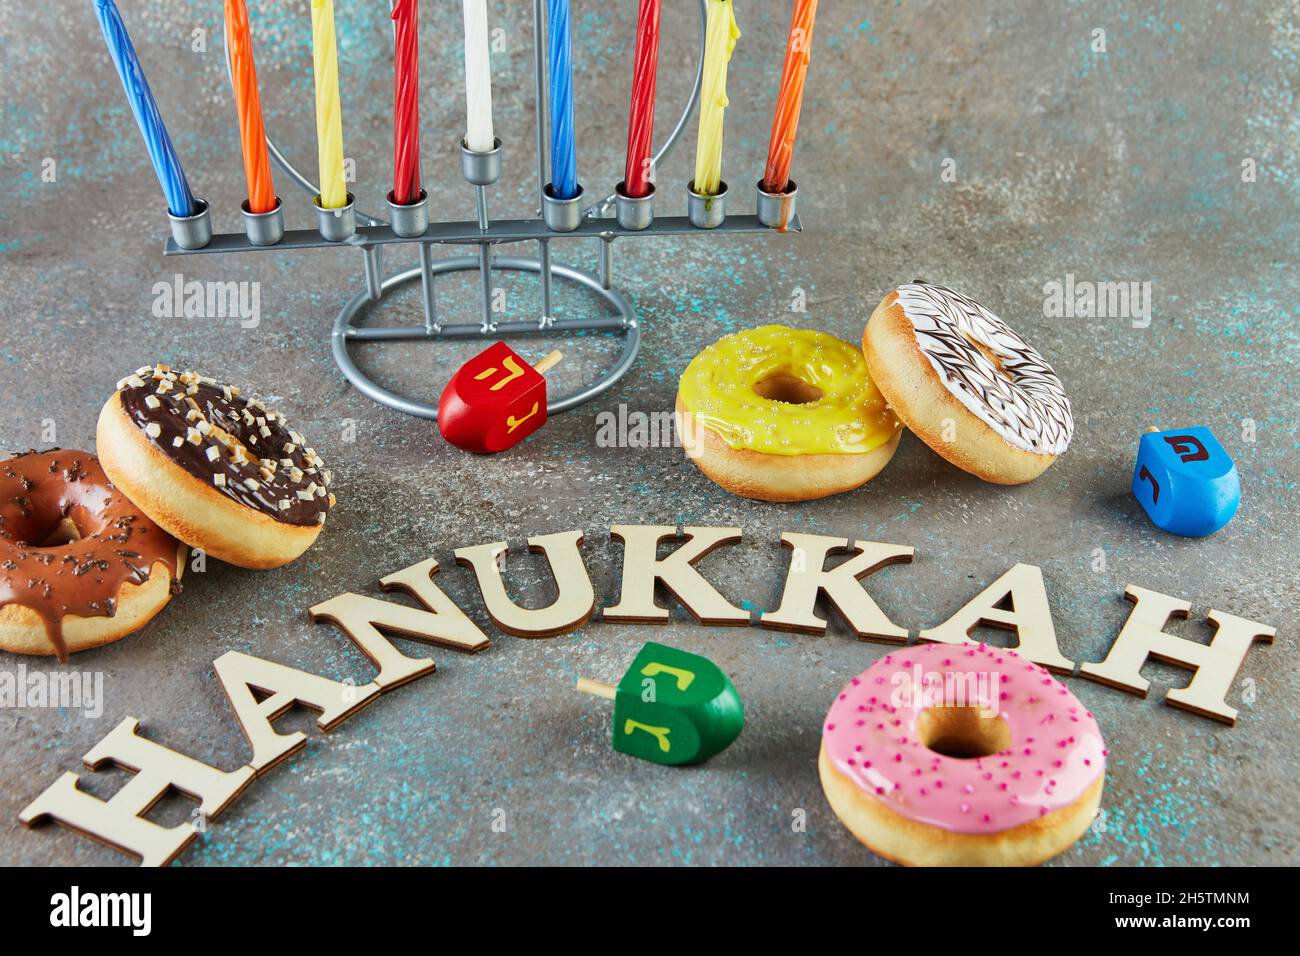 Happy Hanukkah and Hanukkah Sameach - traditional Jewish candlestick with candles, donuts and spinning tops with the inscription Hanukkah. Stock Photo